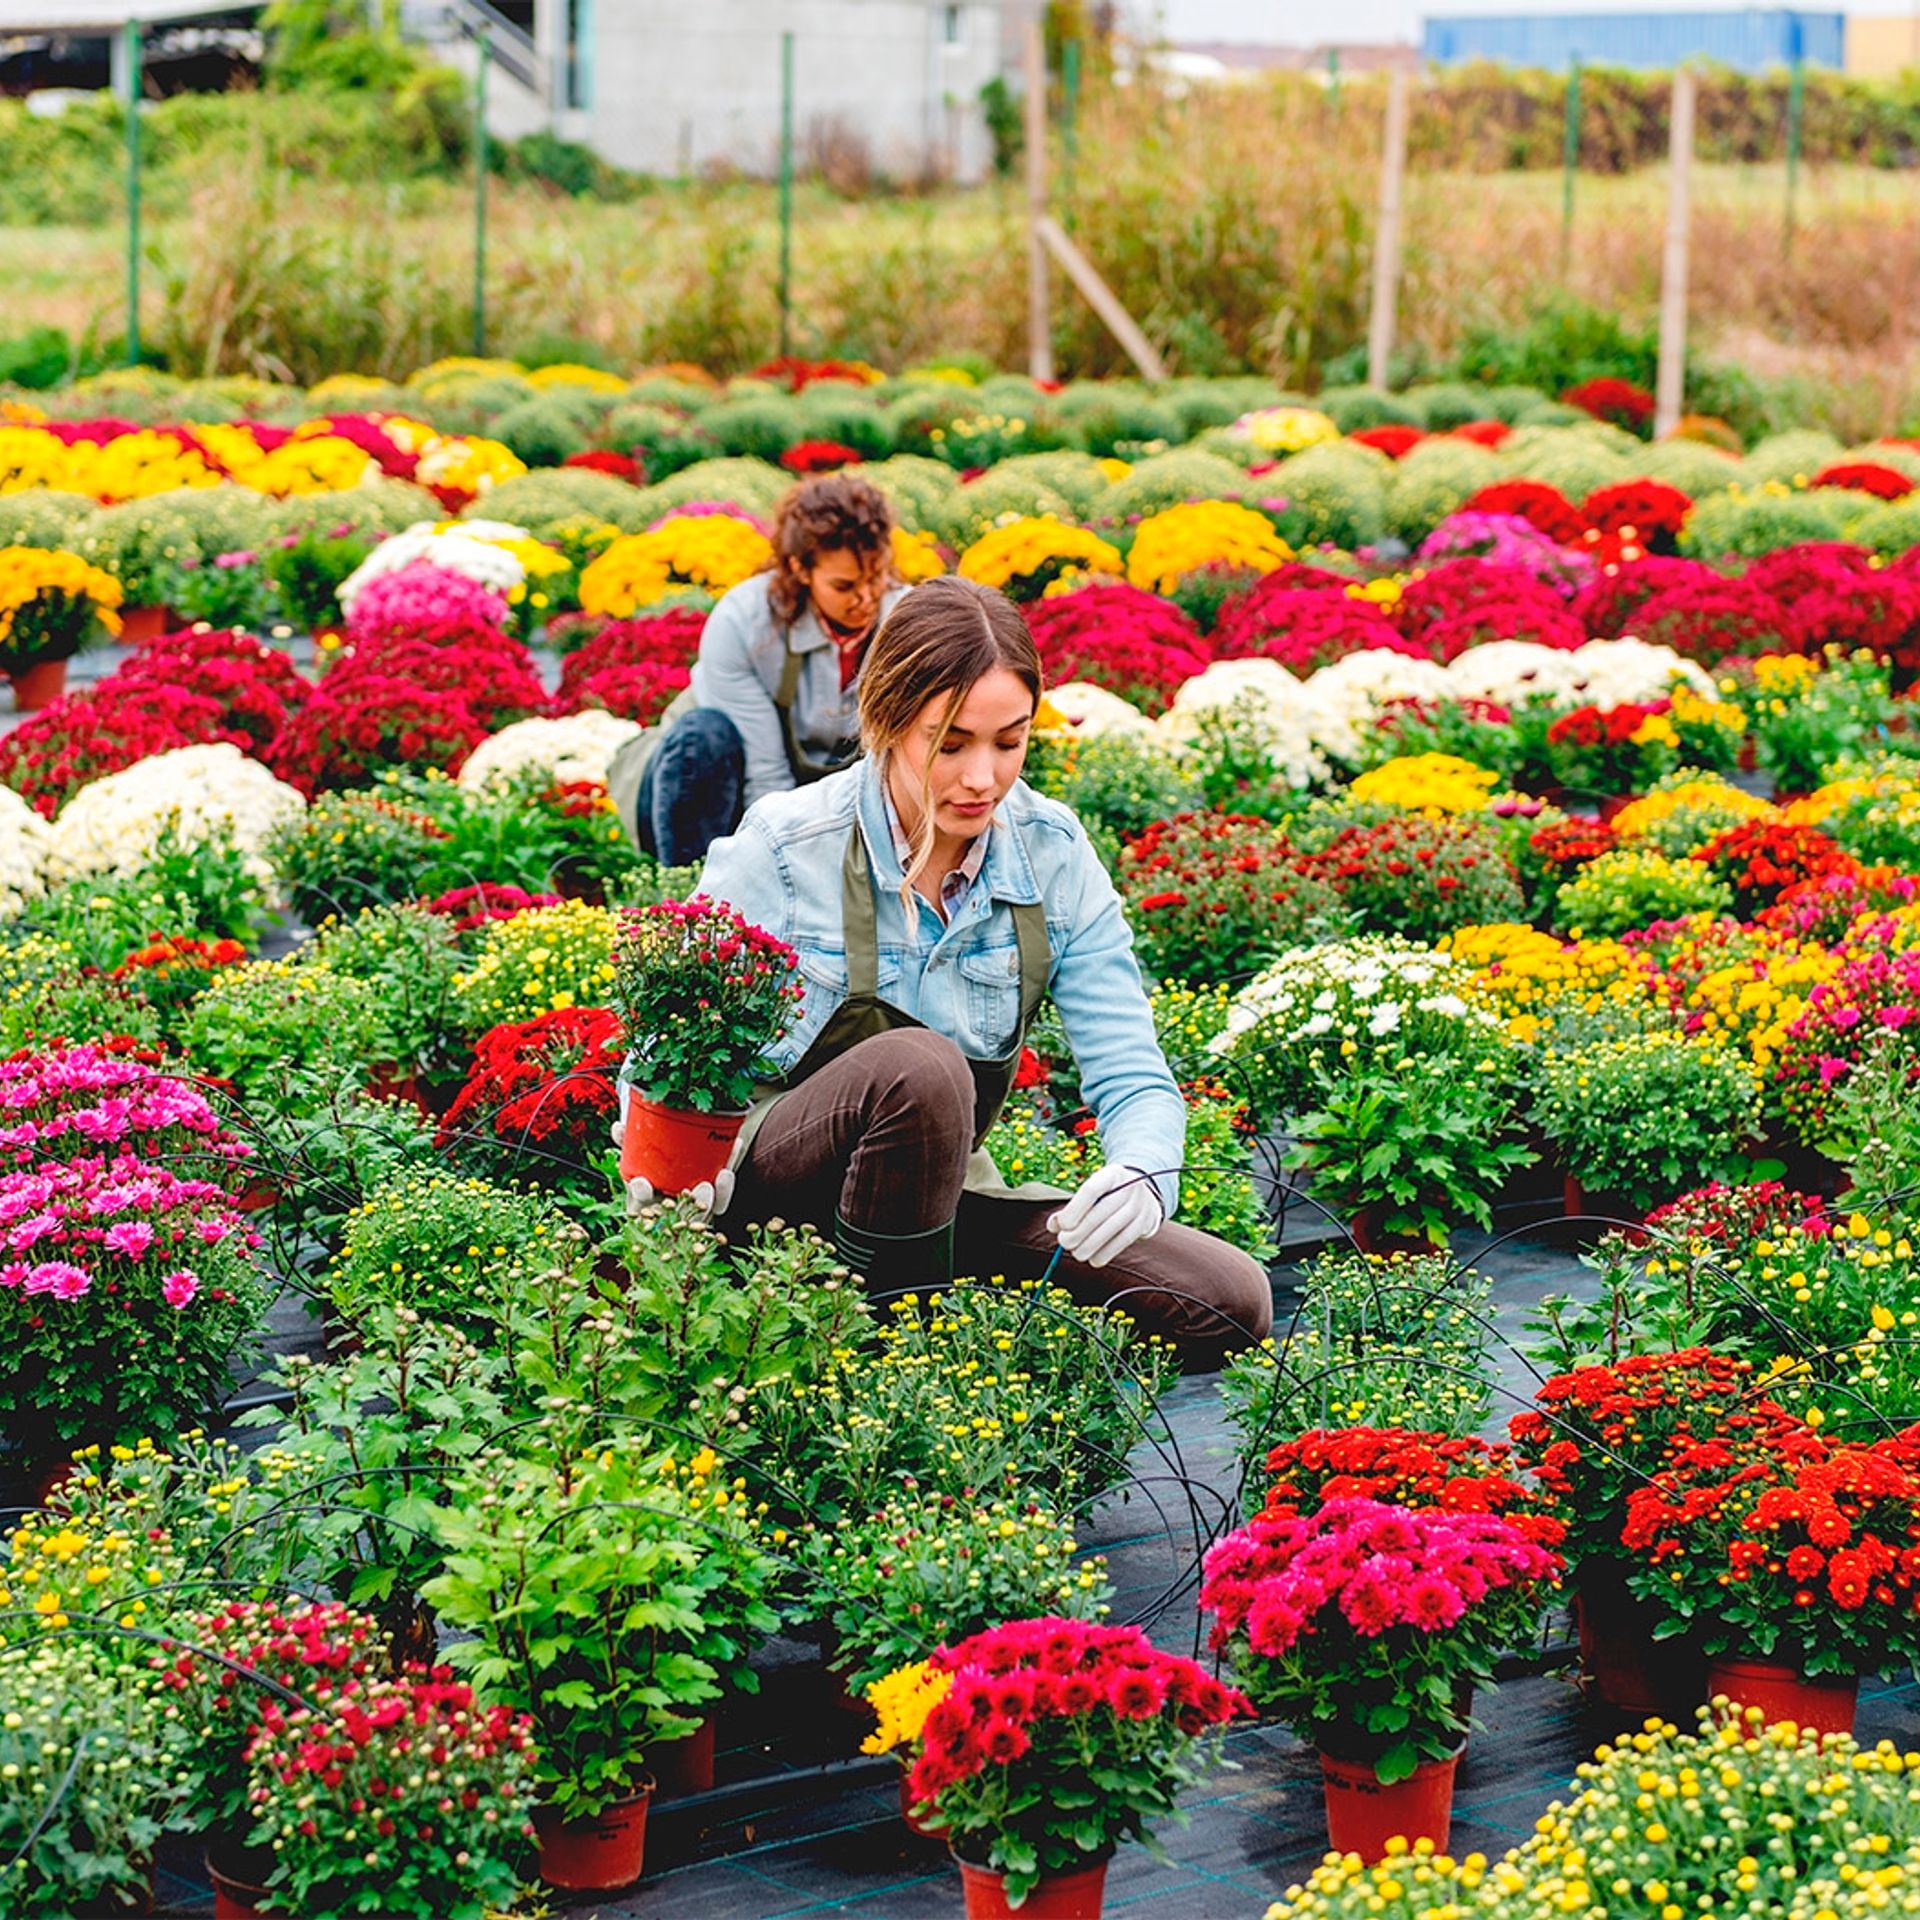 Image of flower and ornamental producers in a field